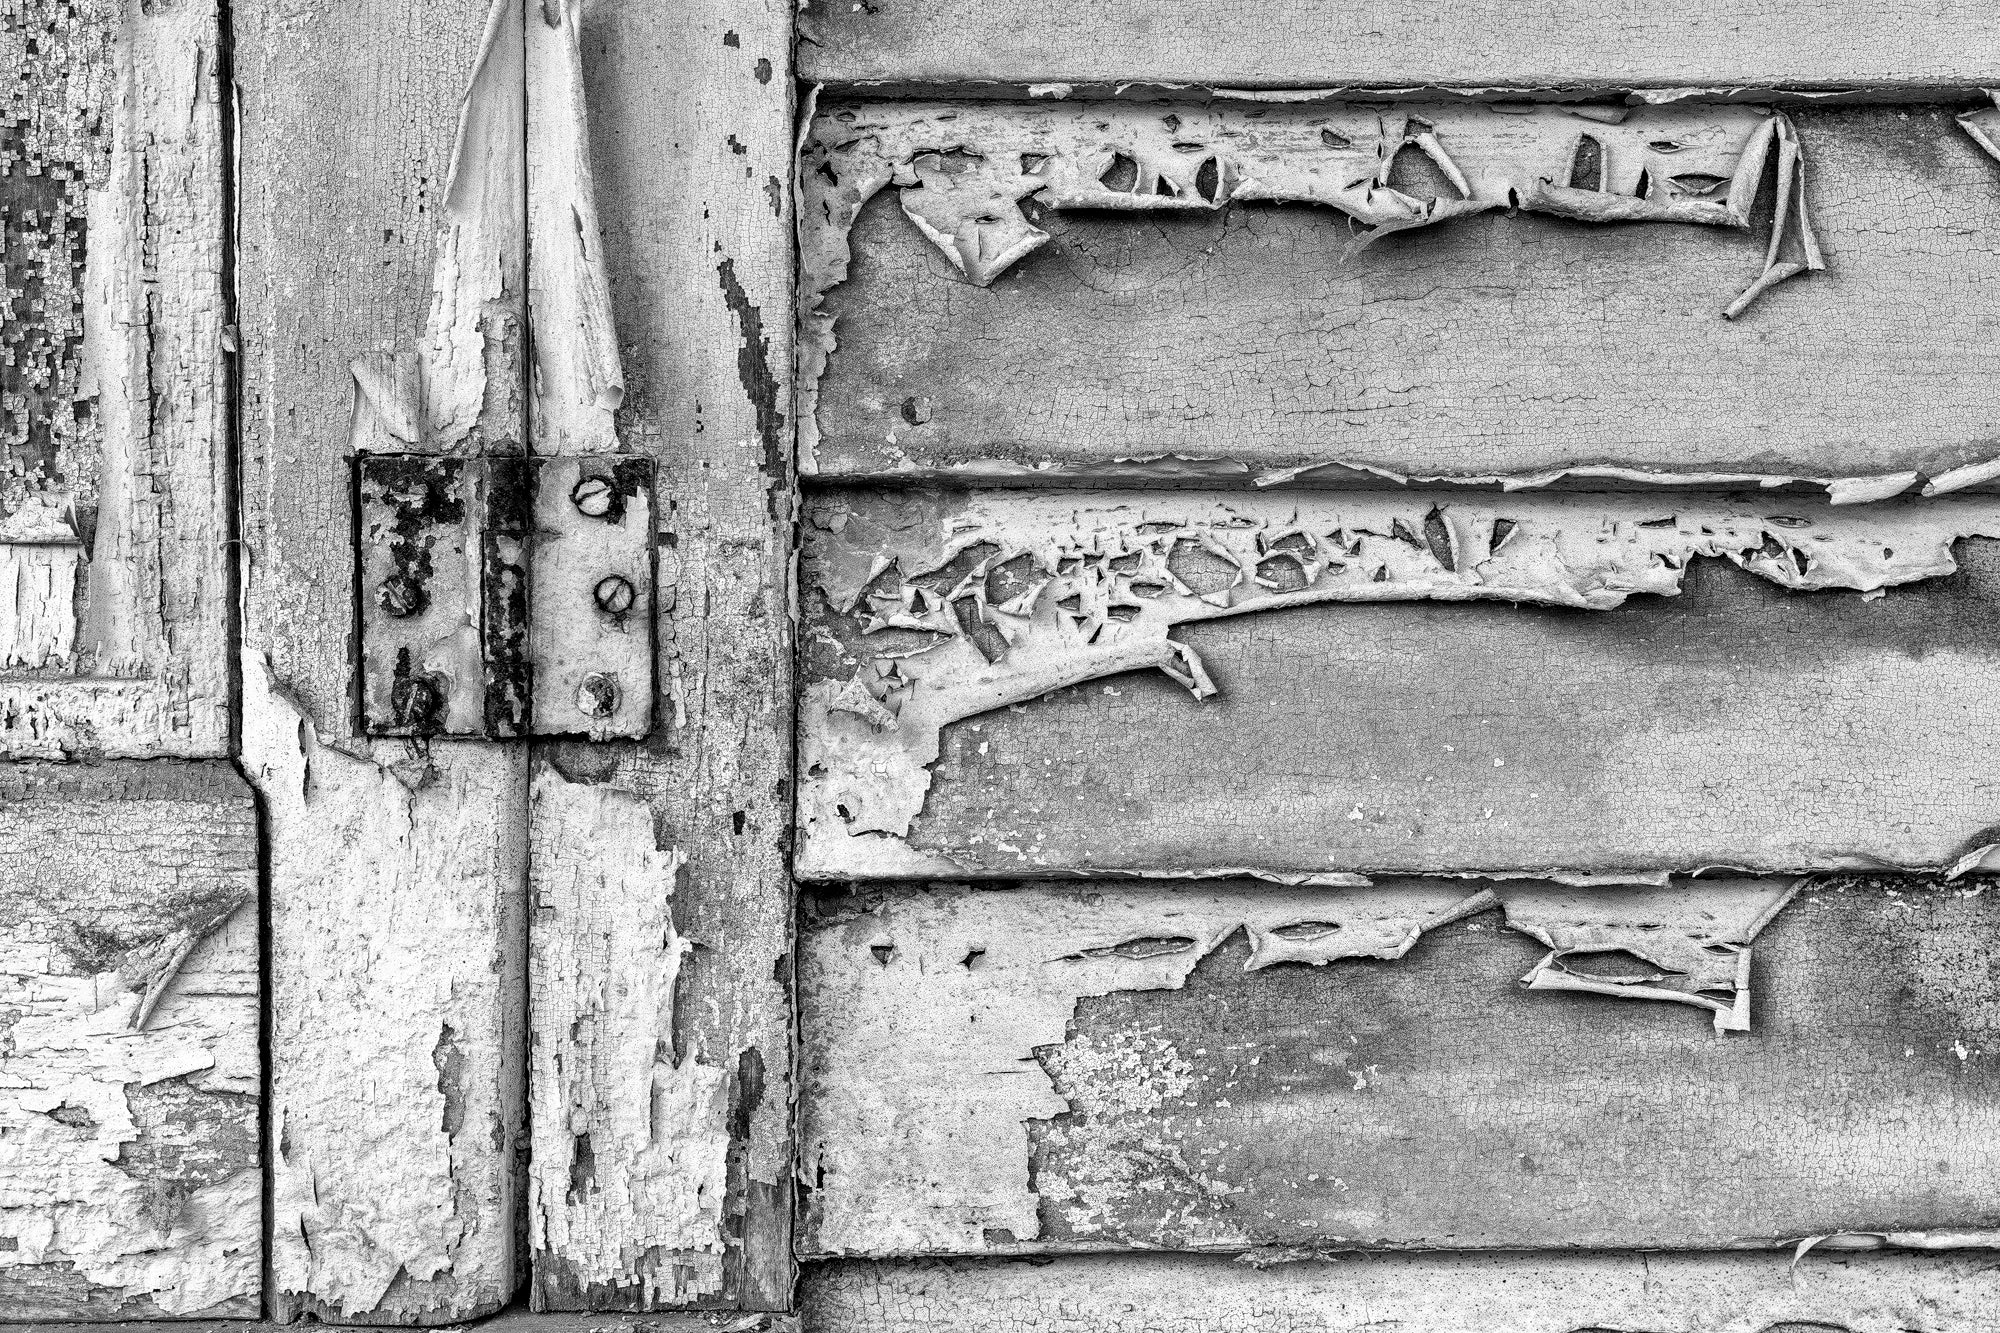 Peeling Paint in an Old Mercantile Store: Black and White Photograph by Keith Dotson. Click to buy a fine art print.